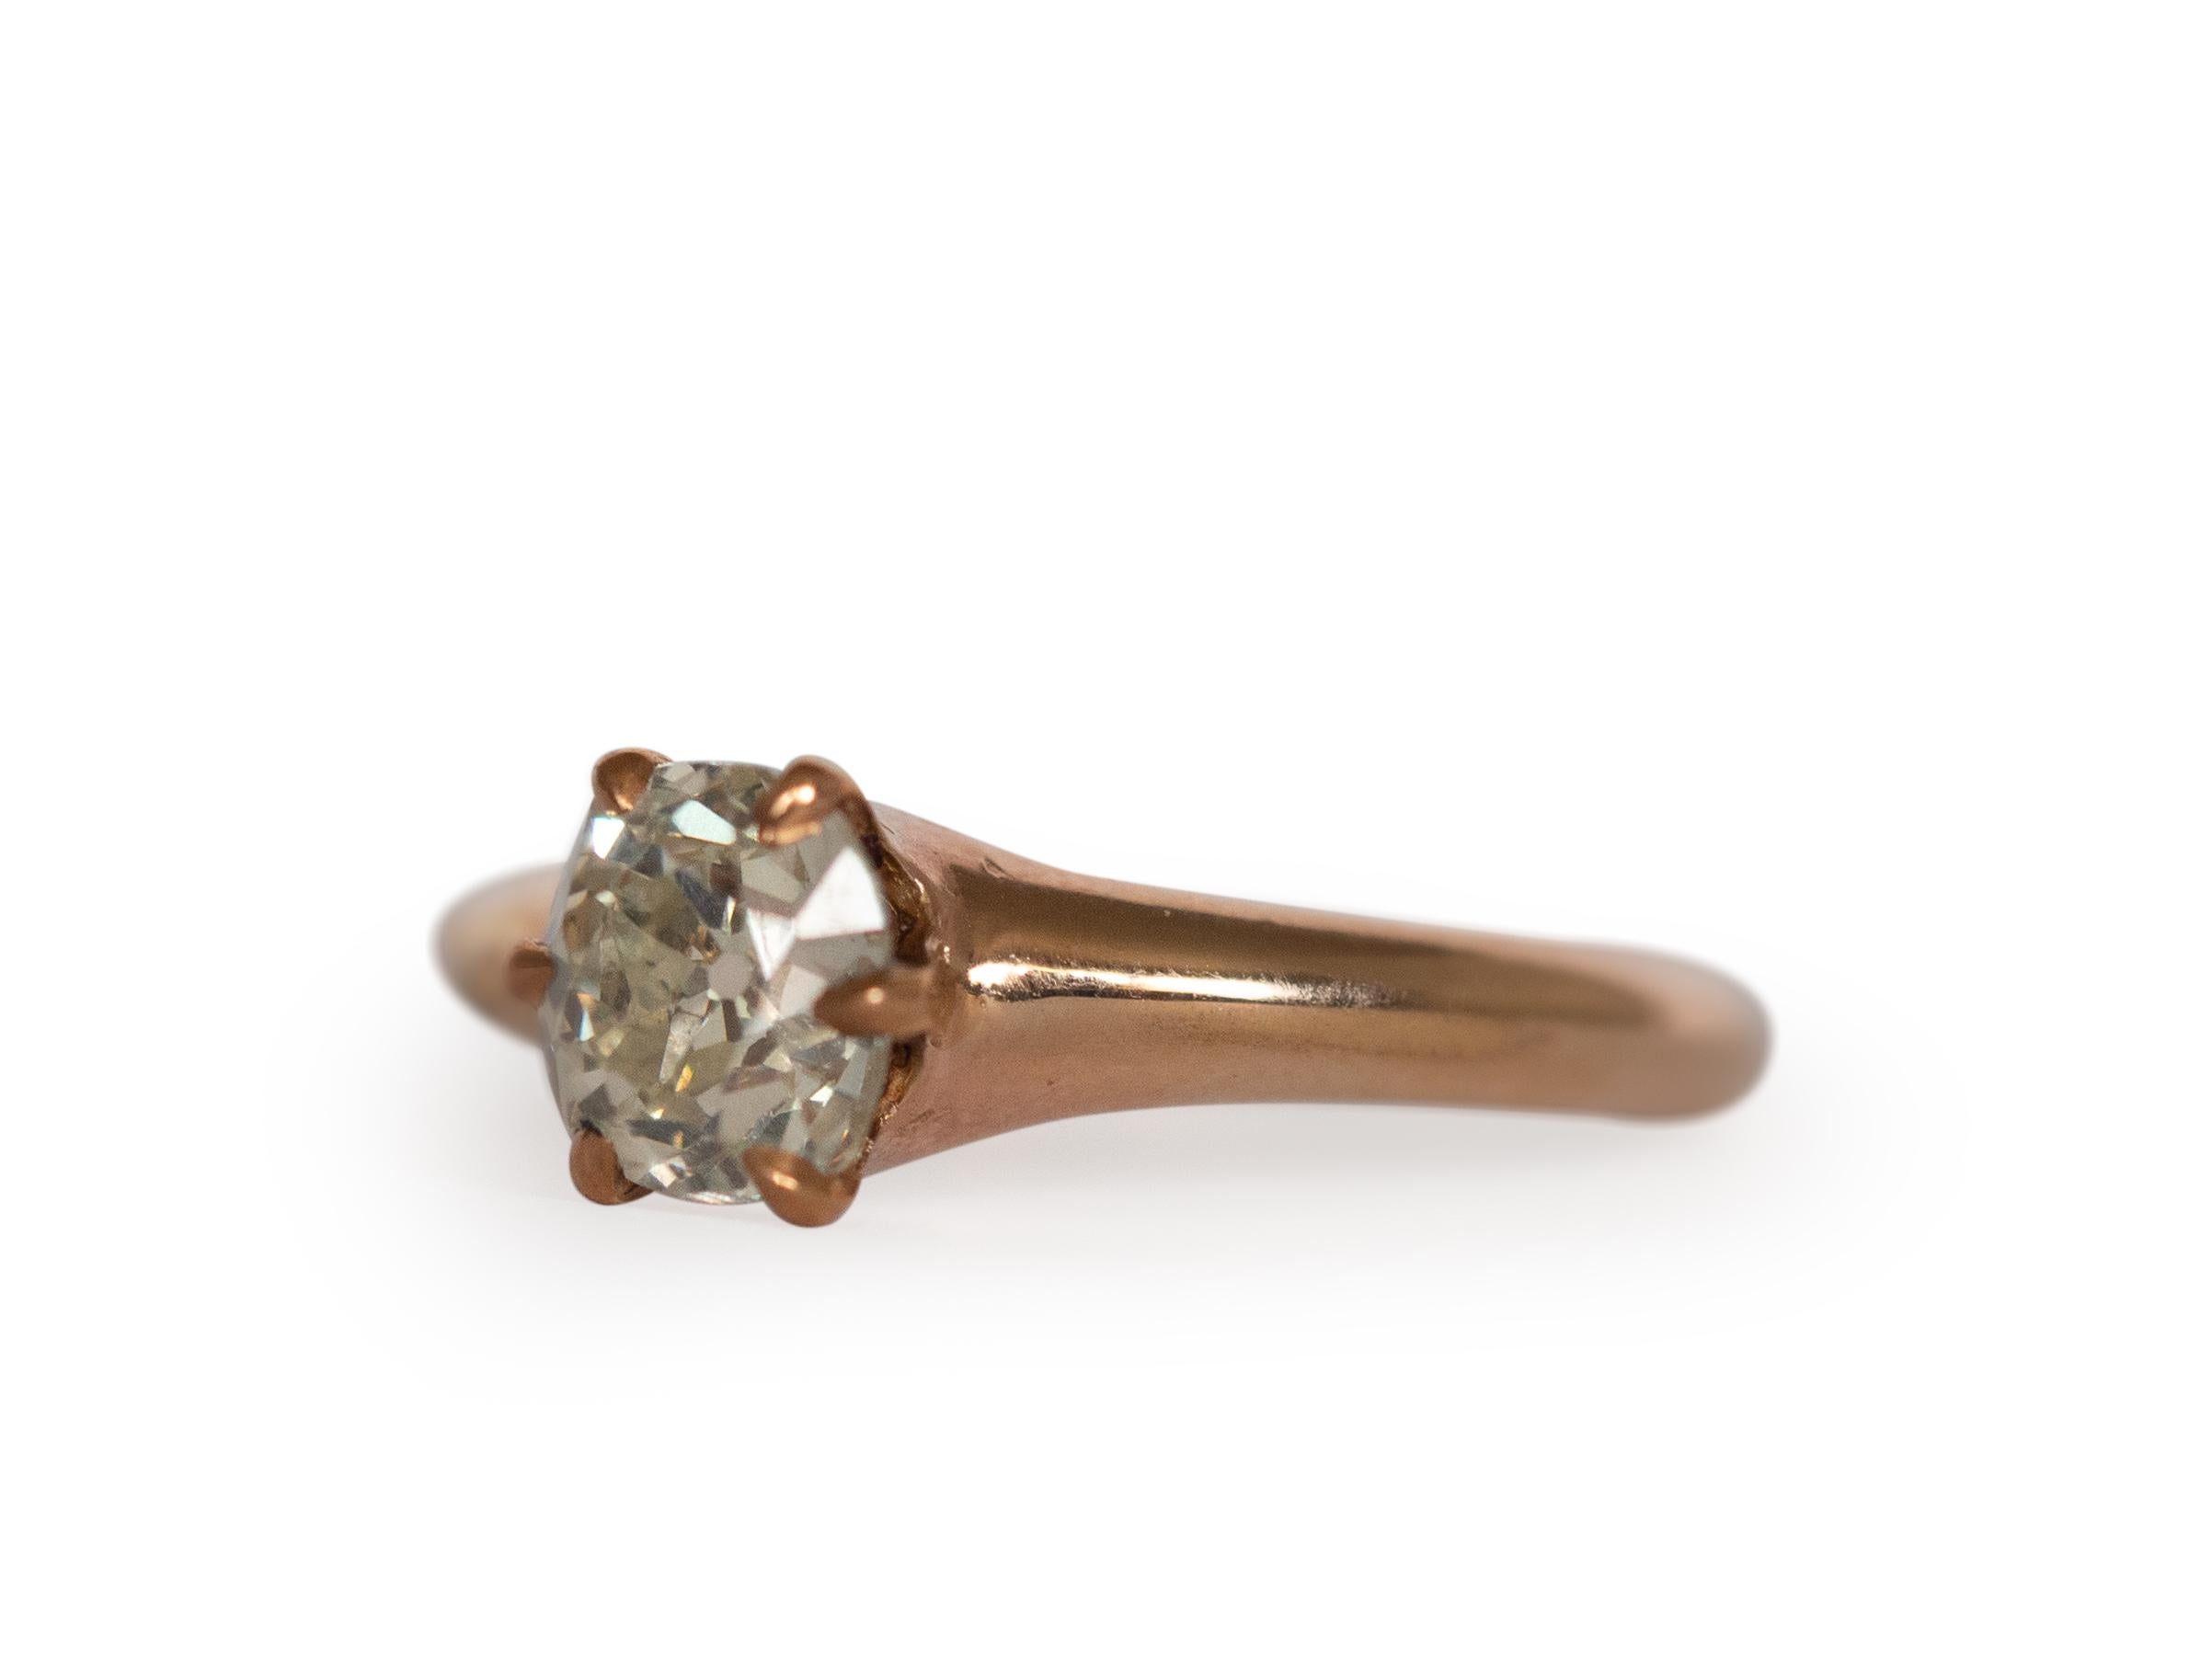 Item Details: 
Ring Size: 5.5
Metal Type: 14 Karat Yellow Gold [Hallmarked, and Tested]
Weight: 3.1 grams

Center Diamond Details:
Weight: .98 Carat
Cut: Antique Cushion
Color: O-P
Clarity: SI2

Finger to Top of Stone Measurement: 6 mm
Condition: